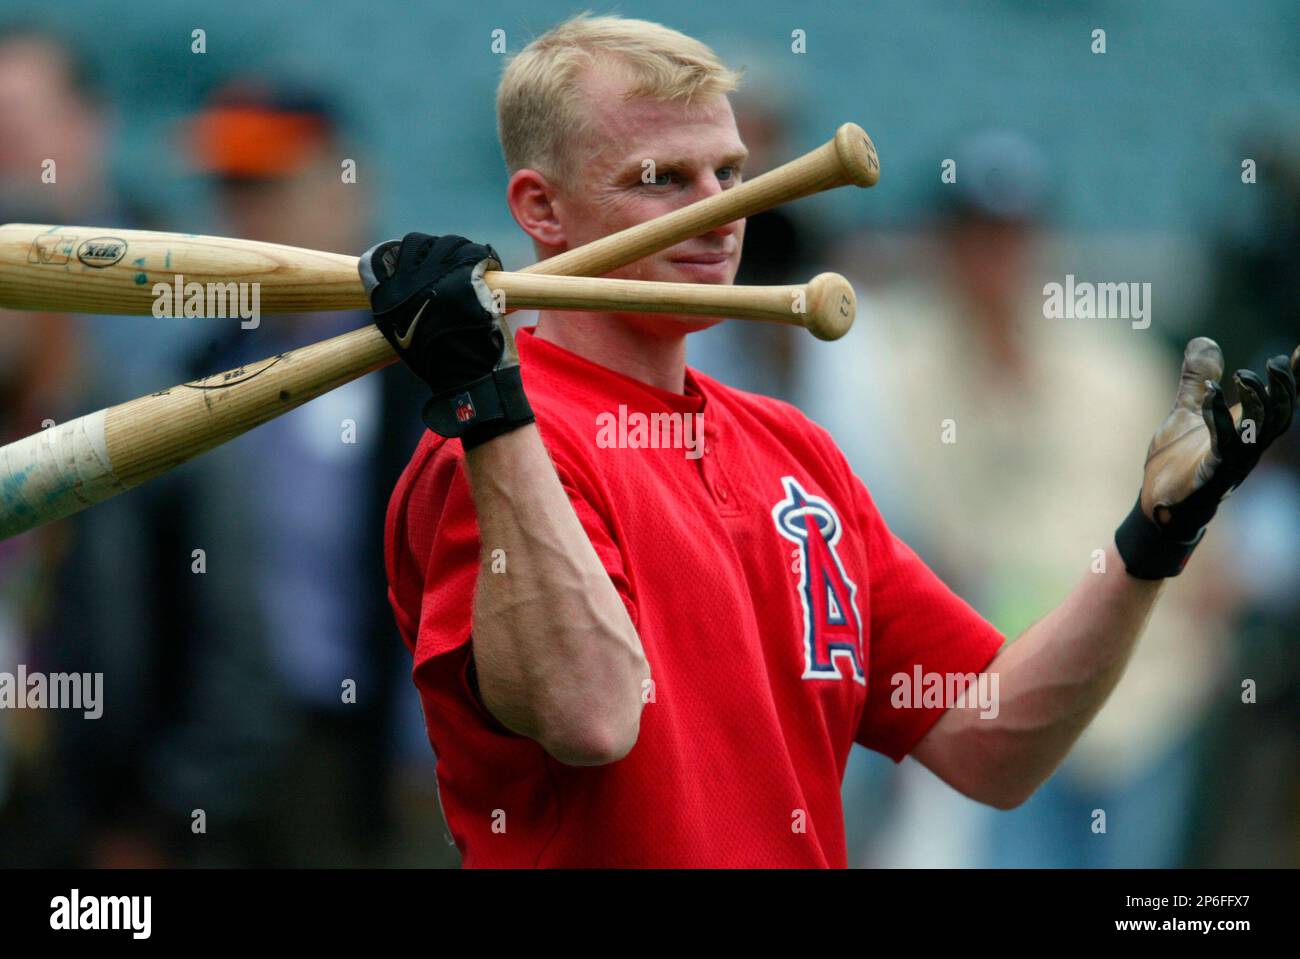 David Eckstein the Angels shortstop up to bat in the World Series